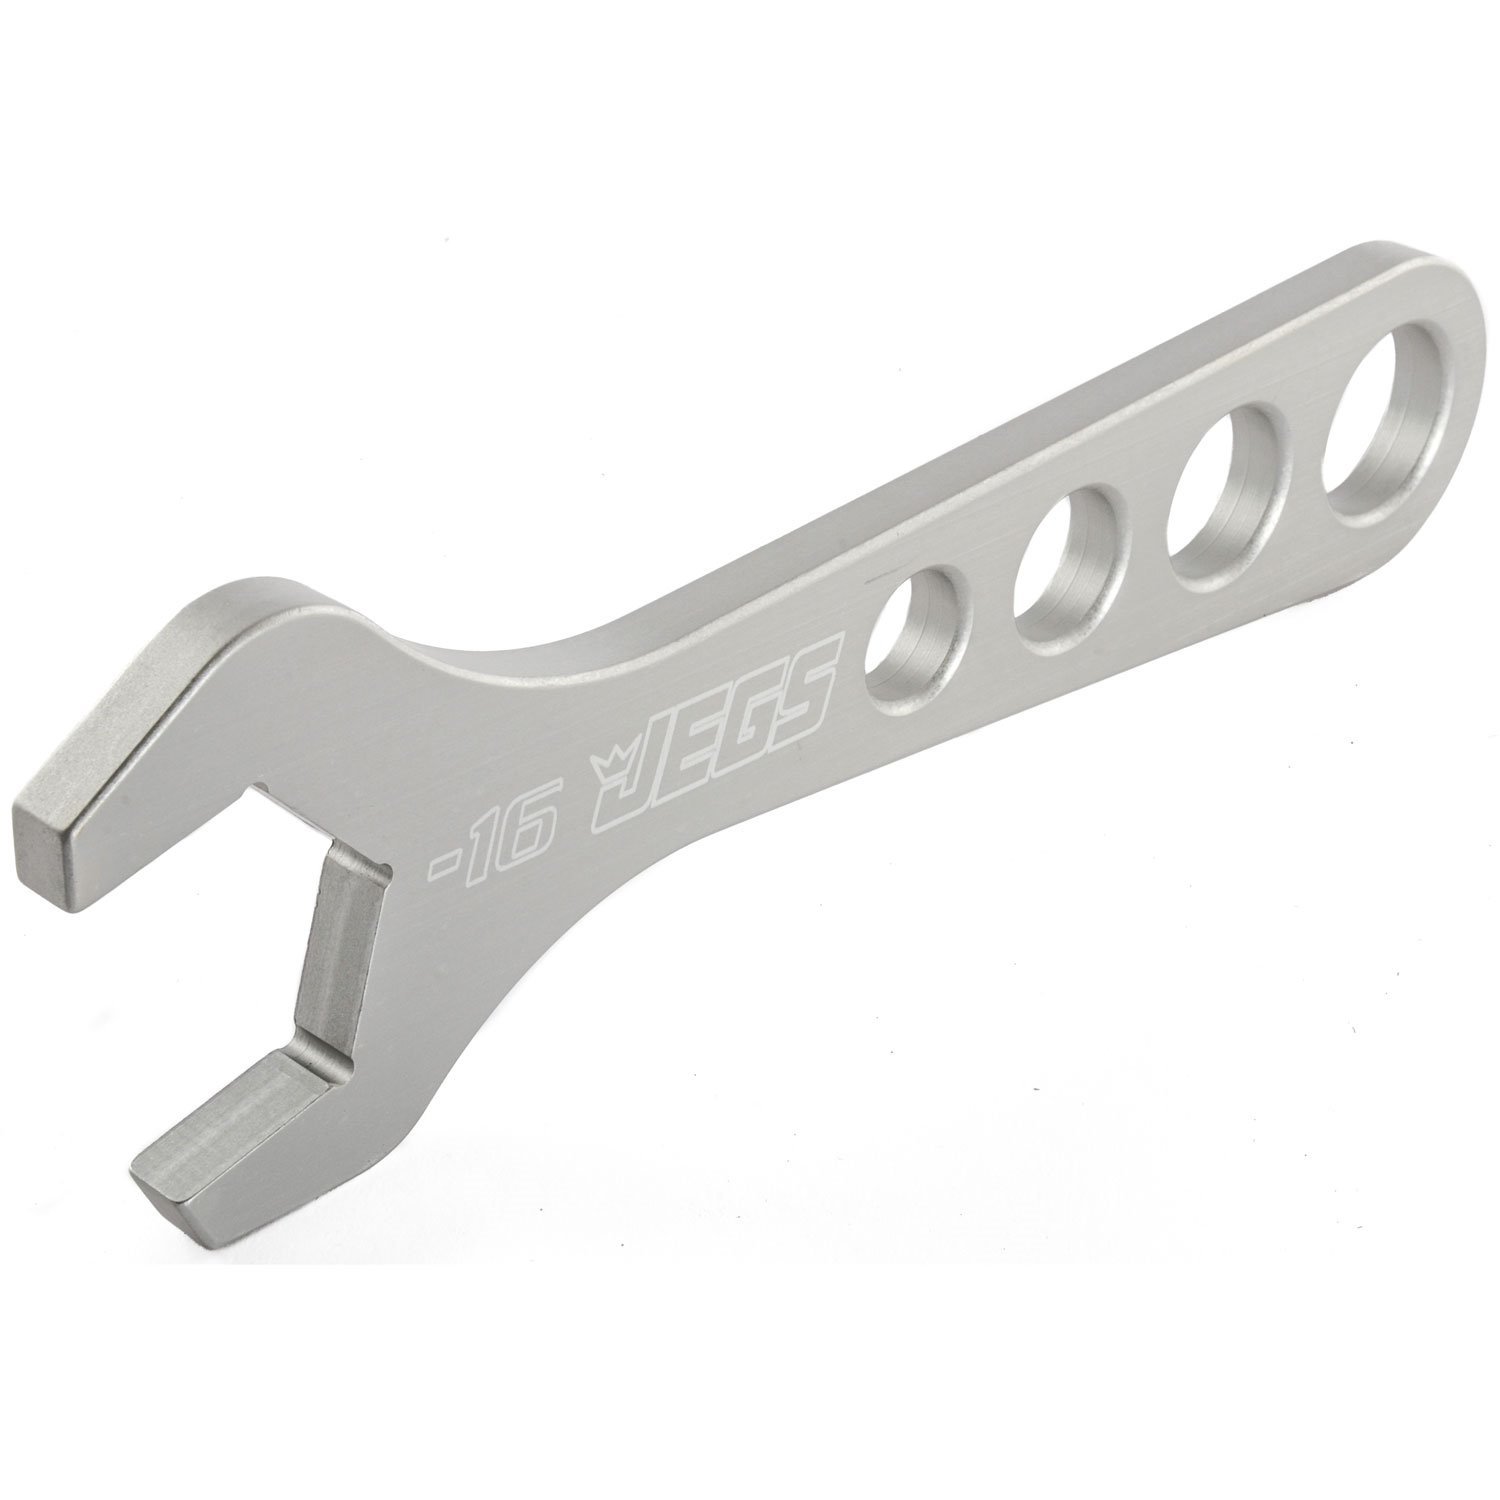 AN Standard Wrench Fits -16AN (1-1/2 in. Hex) Standard Fittings